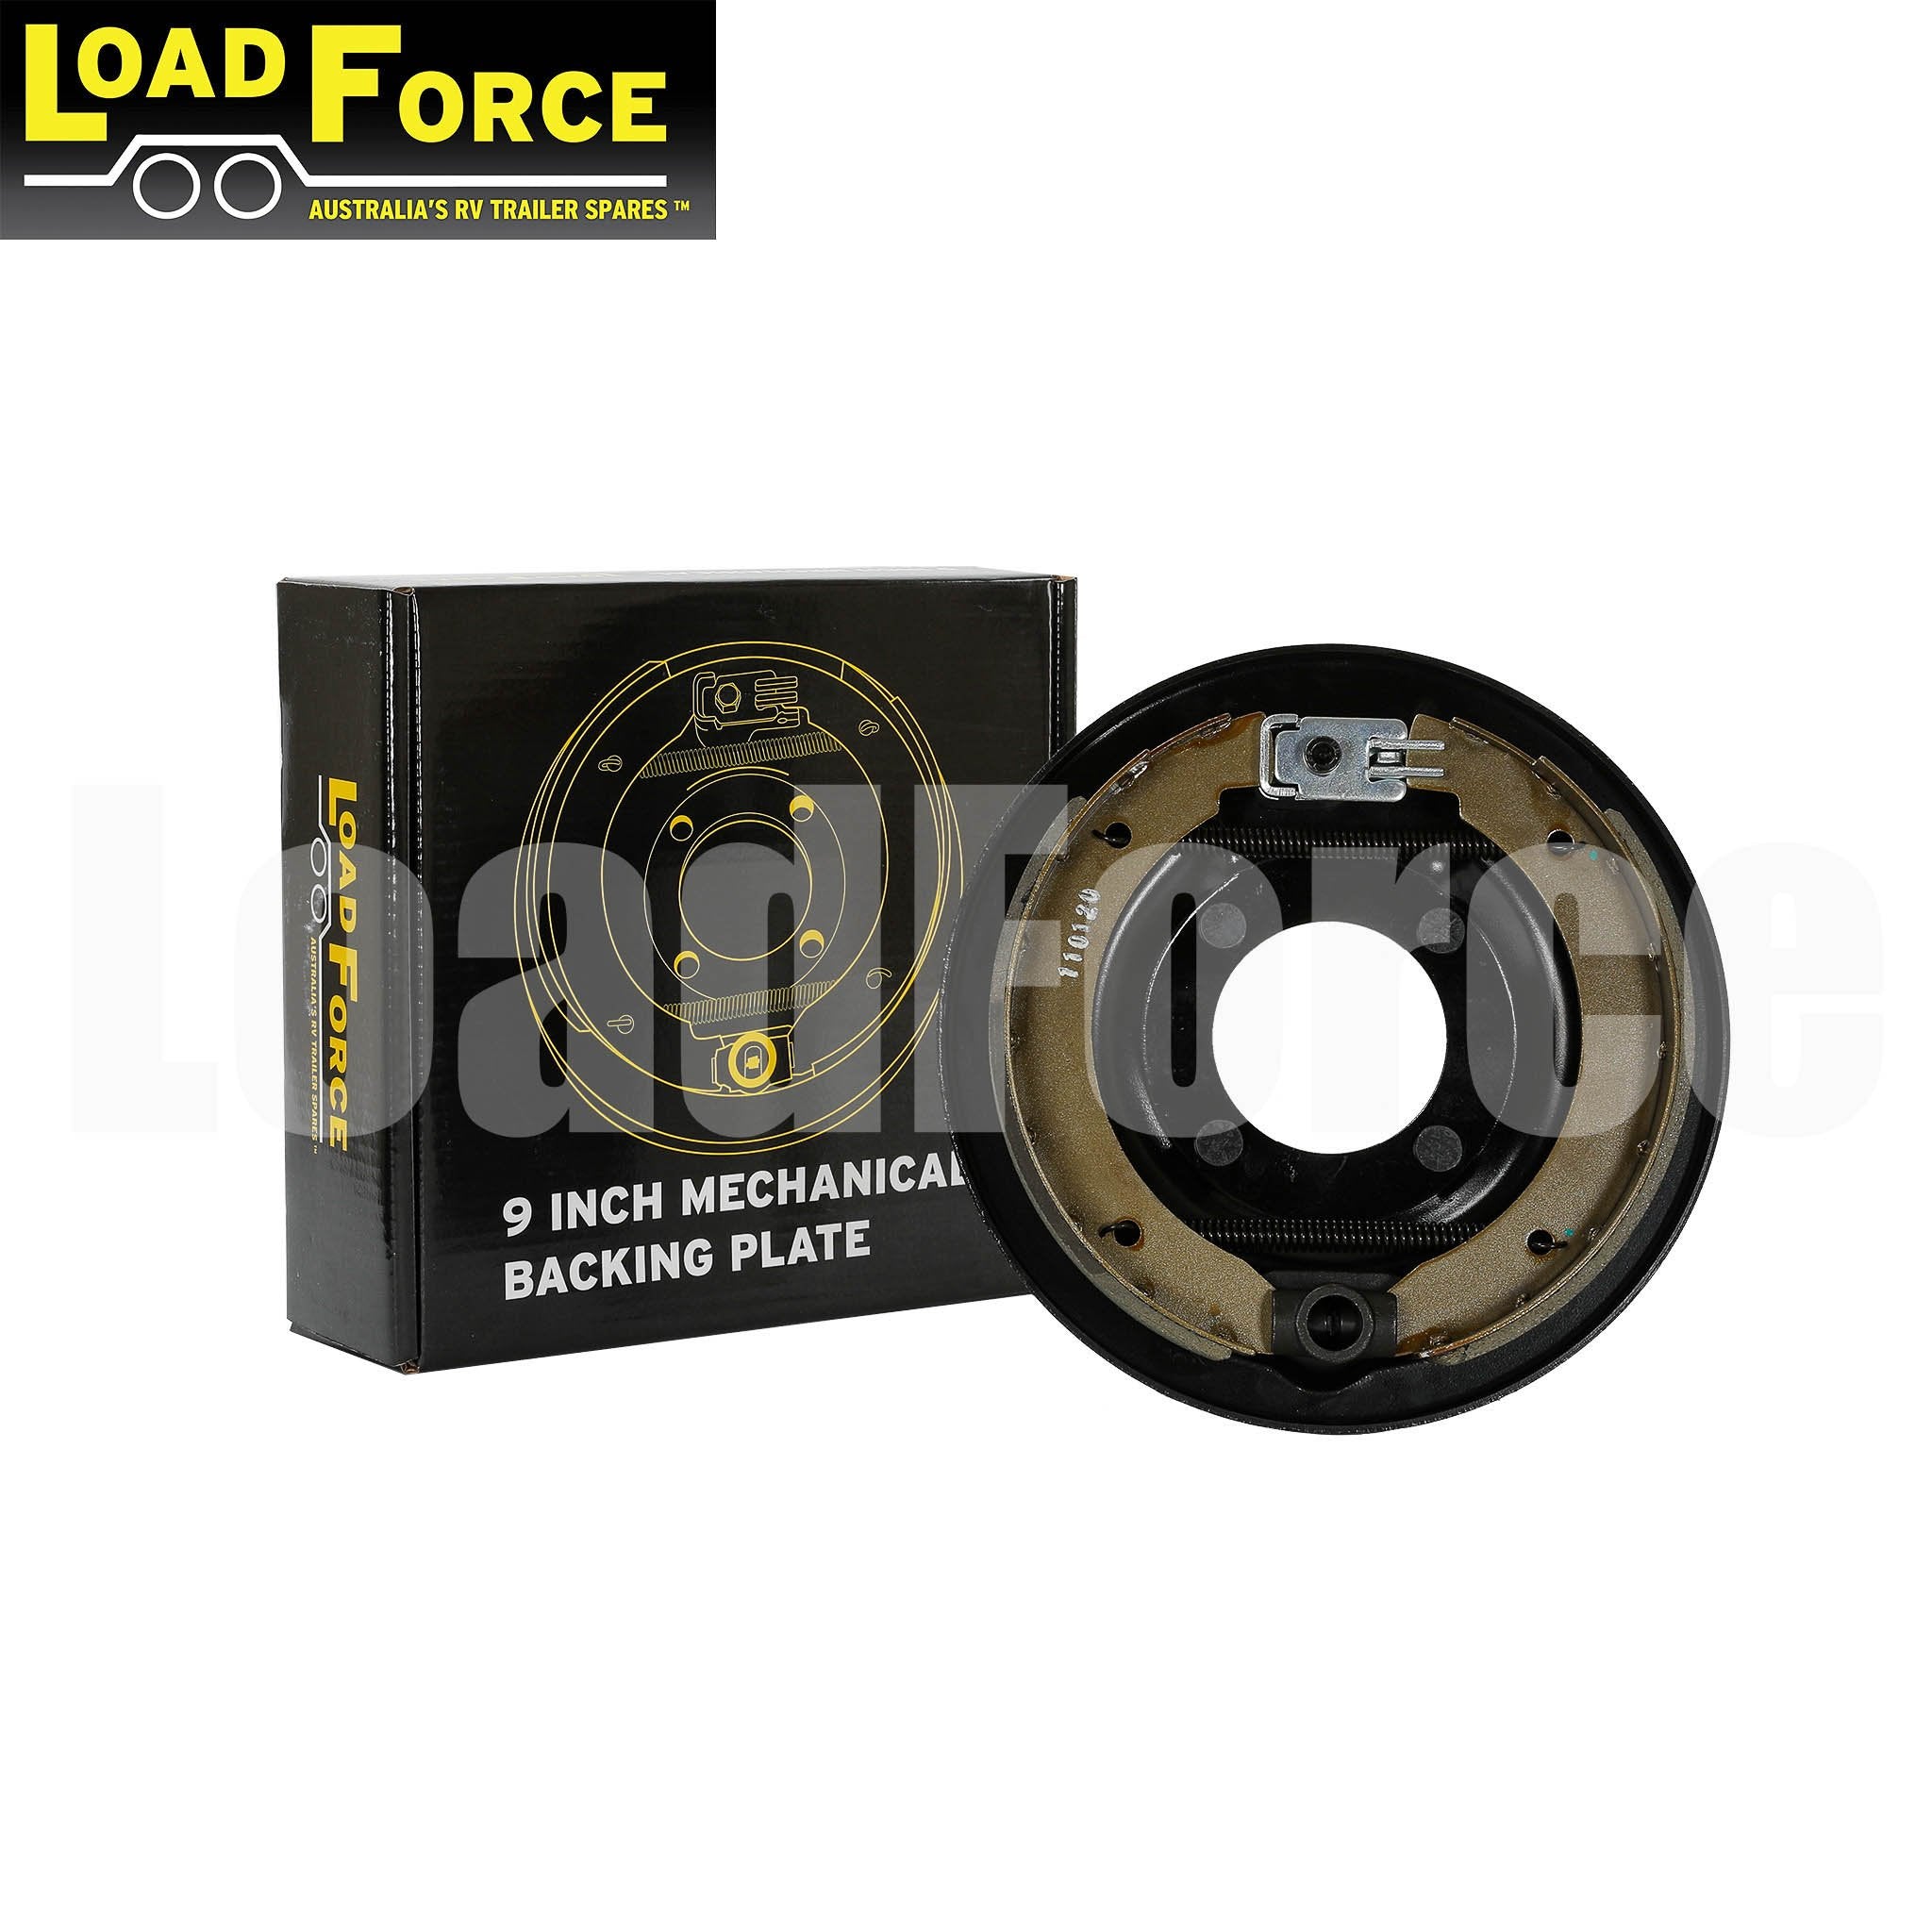 LoadForce 9 inch mechanical backing plate assembly right hand